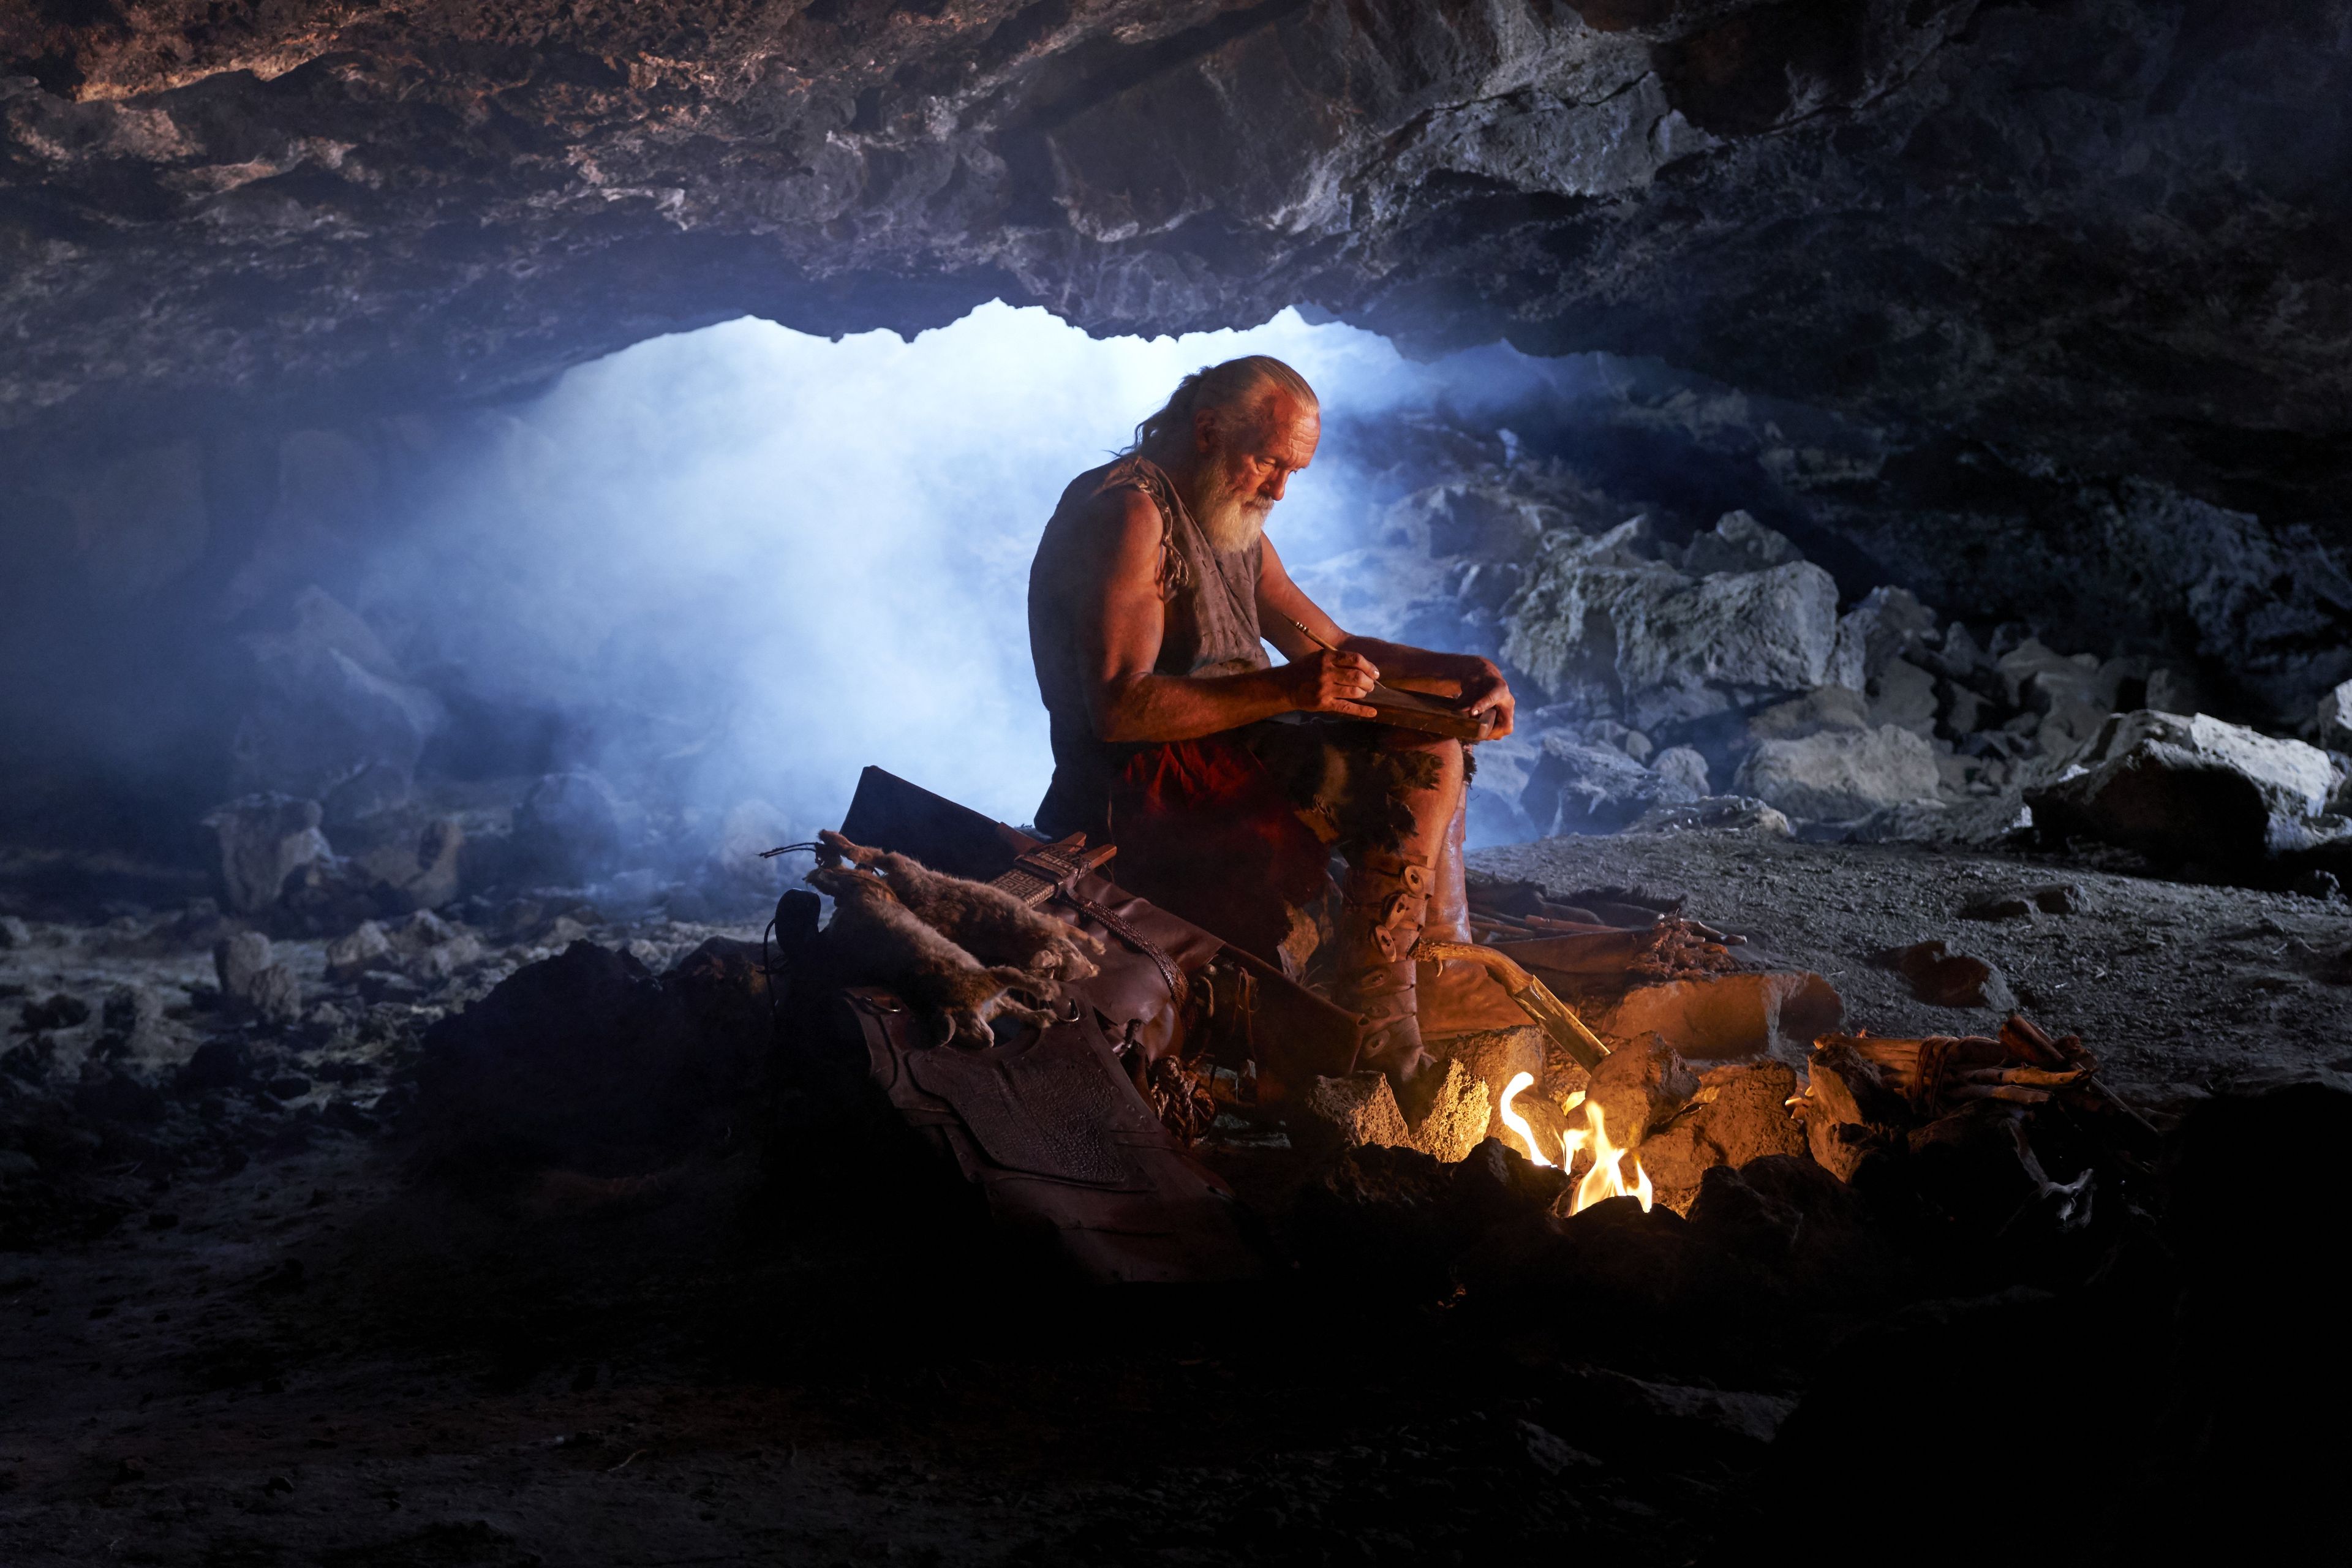 Moroni, son of Mormon, writes by a fire as he dwells in the cavity of a rock.